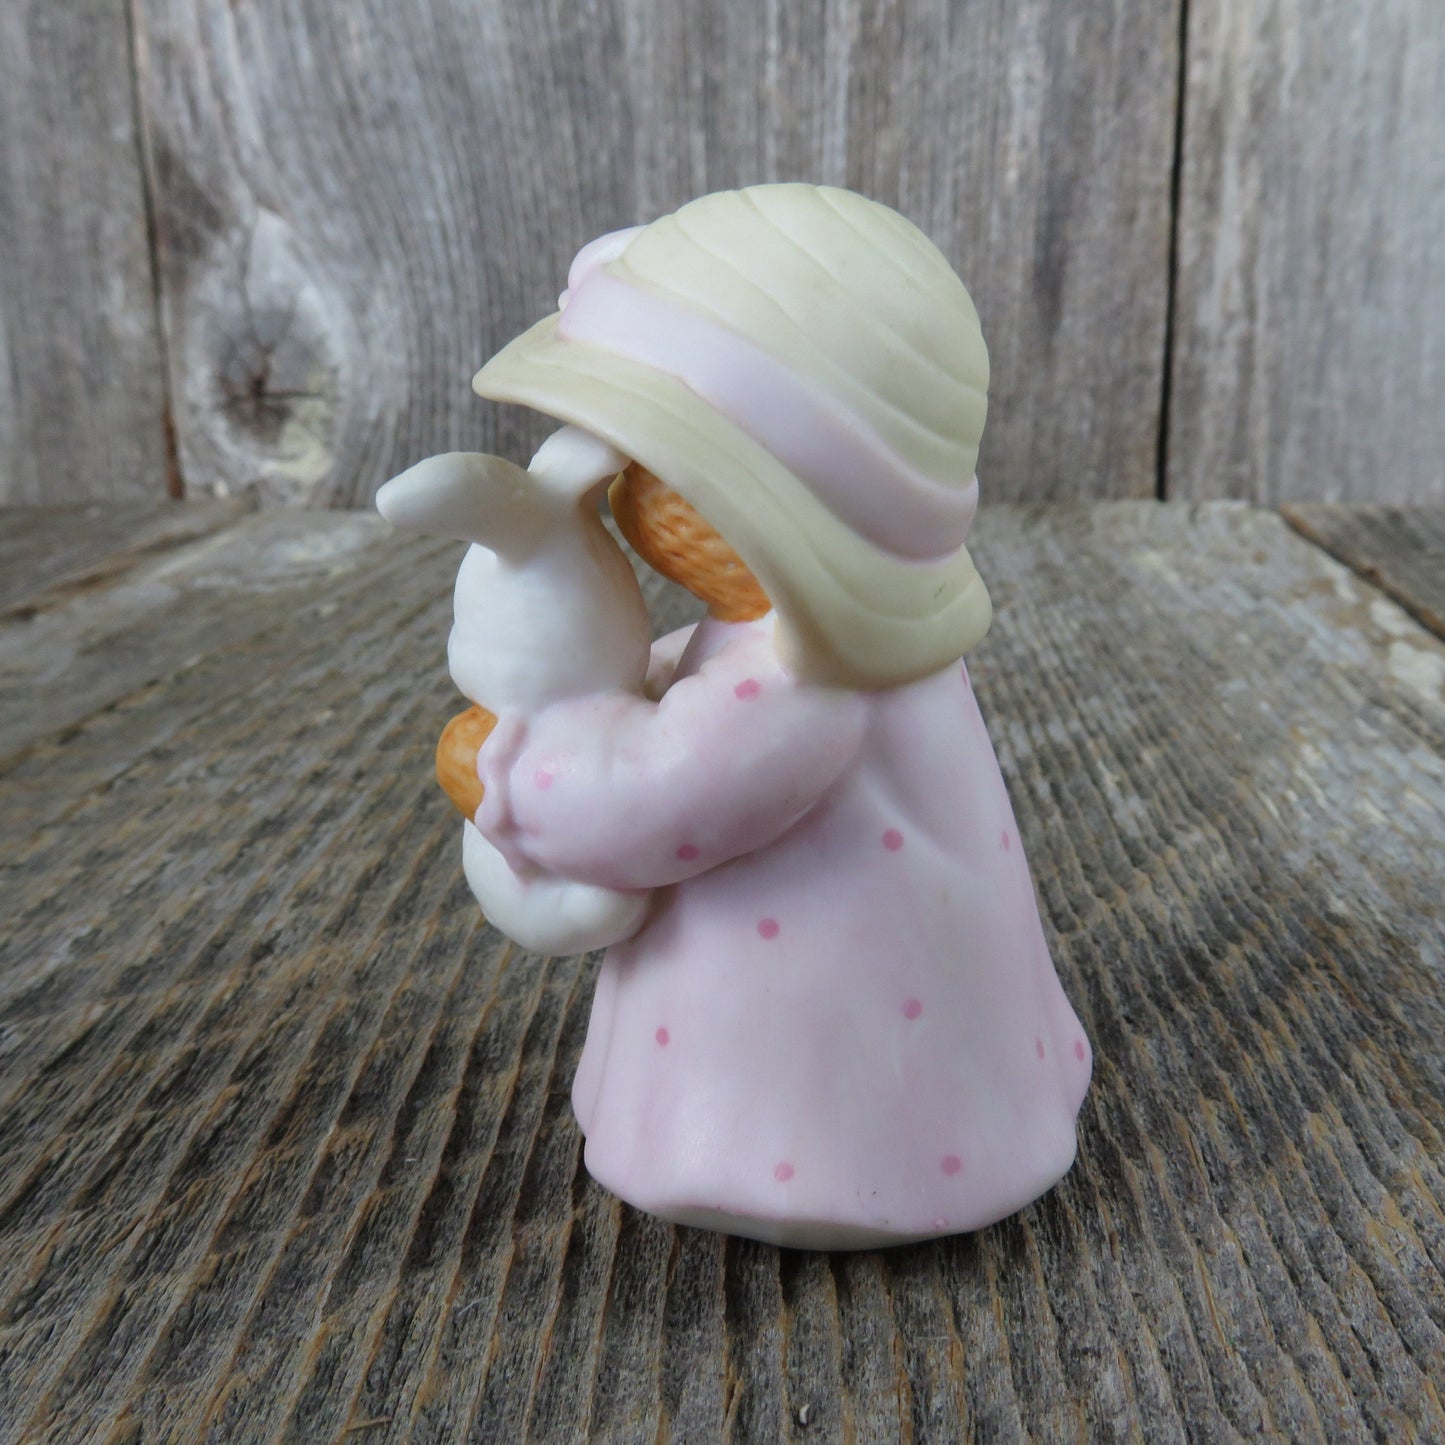 Bear in Big Hat Holding A Bunny Figurine Girl Easter Dress Lucy Rigg Enesco Vintage 1987 Taiwan